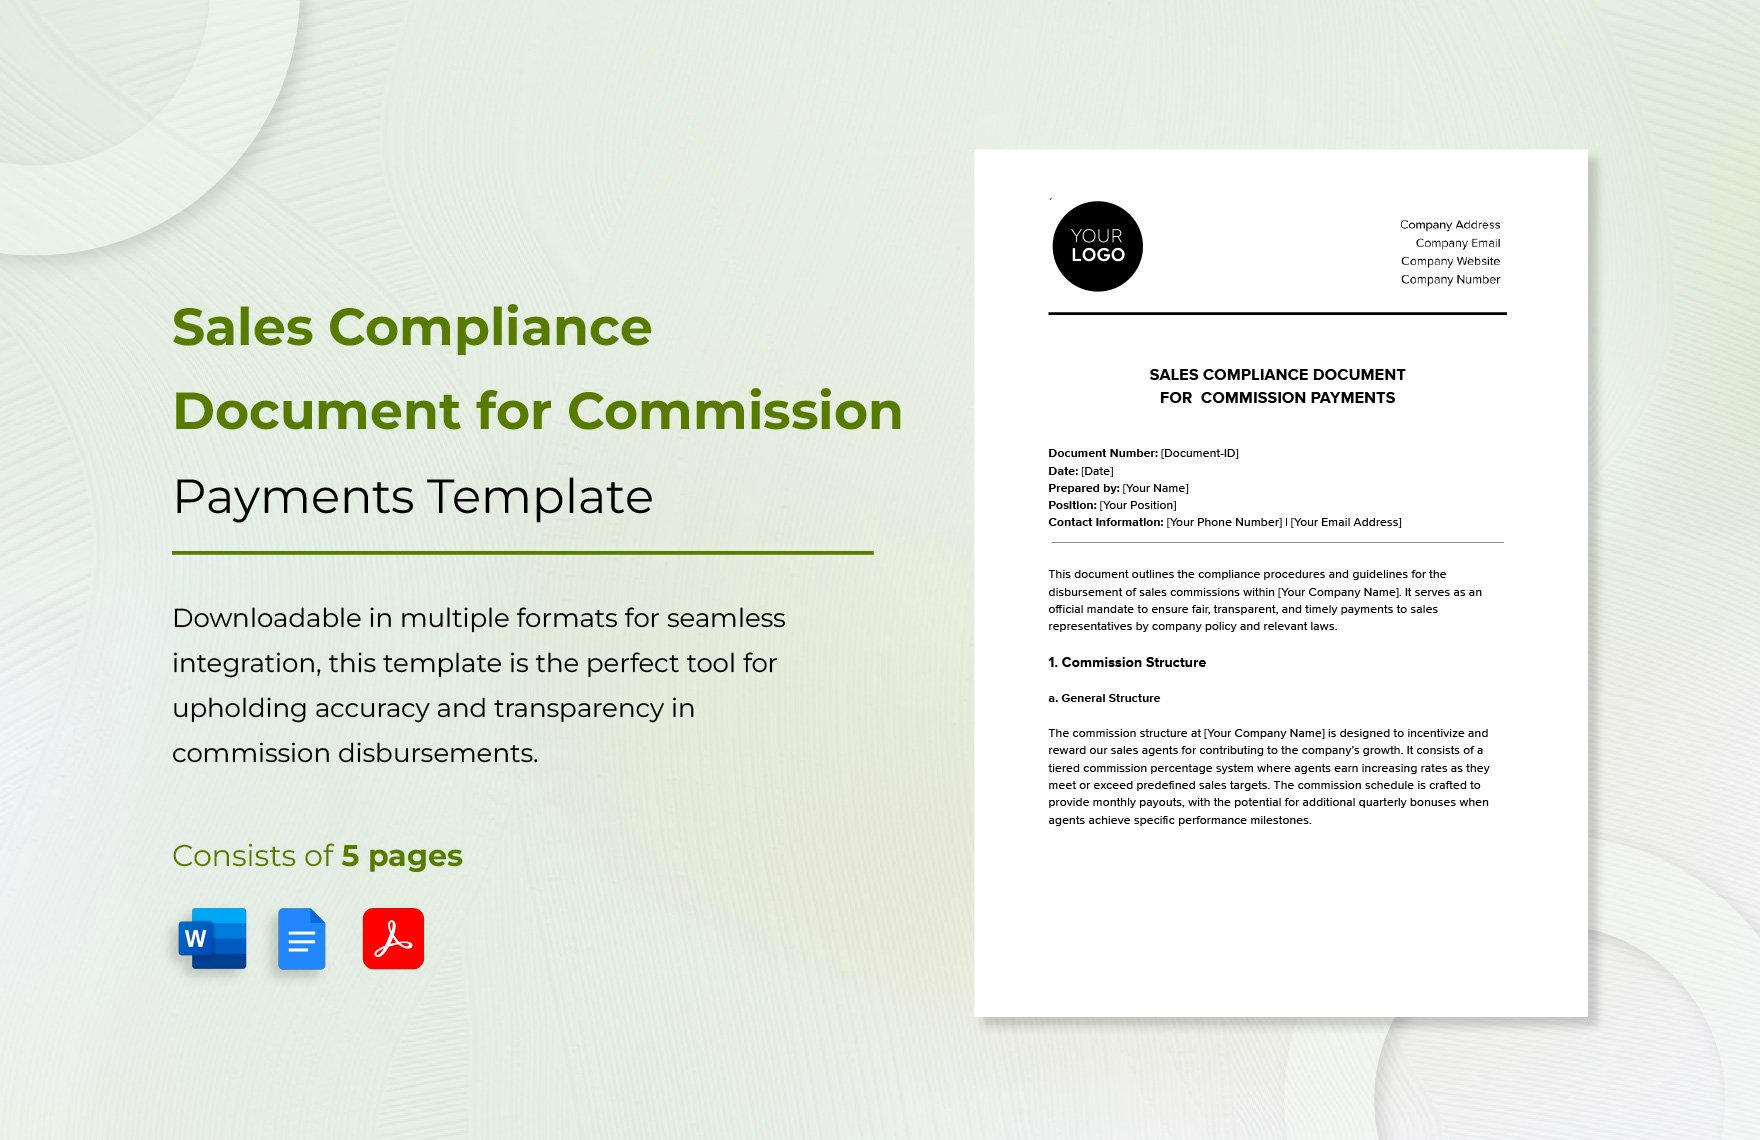 Sales Compliance Document for Commission Payments Template in Word, Google Docs, PDF